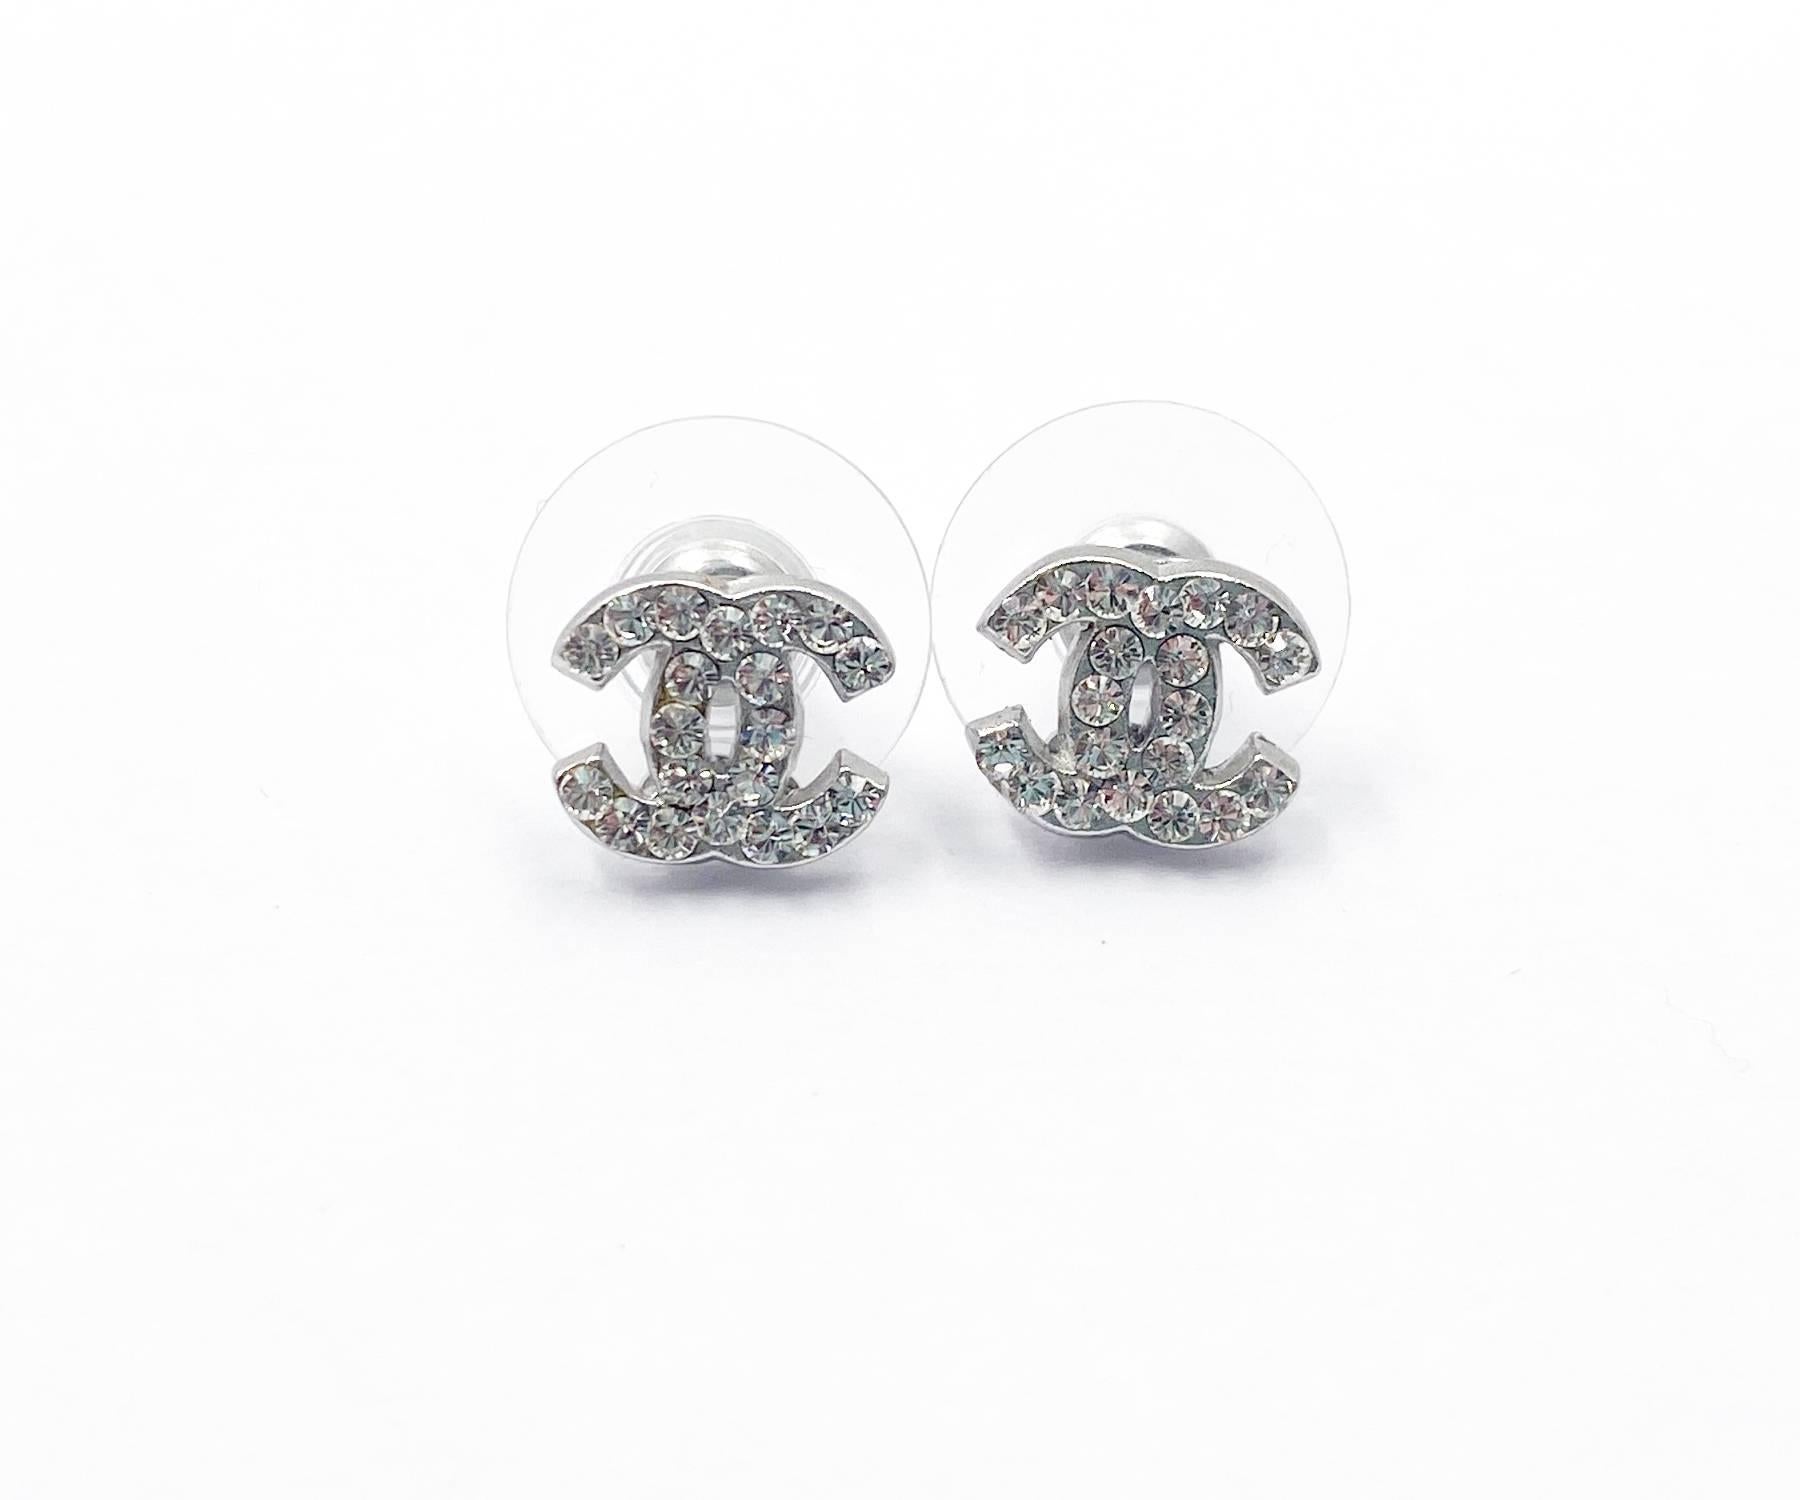 Chanel Classic Silver CC Crystal Small Piercing Earrings

*Marked 08
*Made in France
*Comes with the original box

-It is approximately 0.4